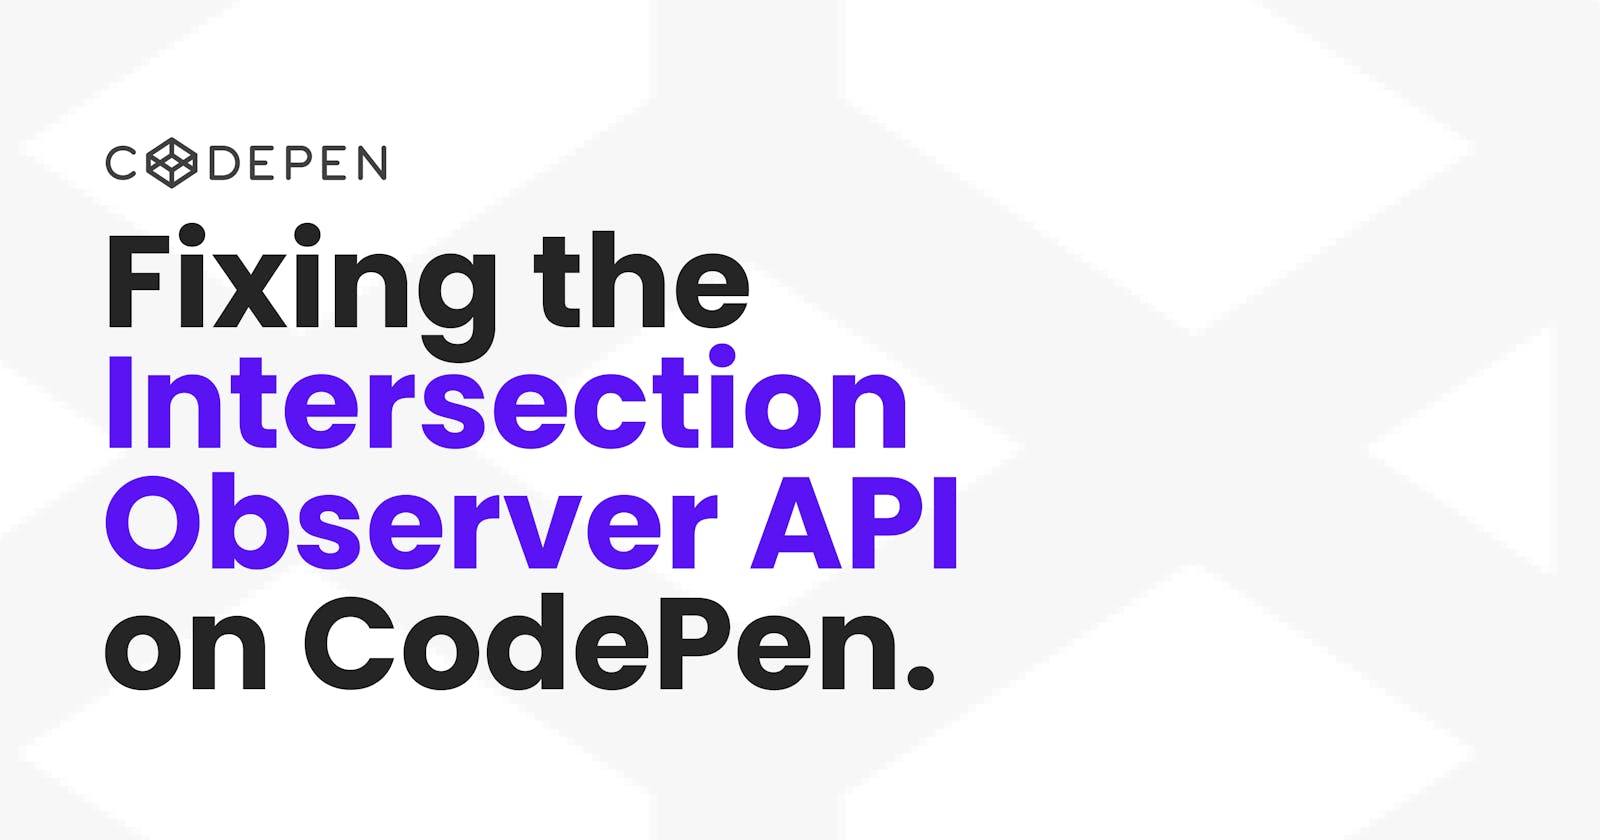 Fixing the Intersection Observer API on CodePen